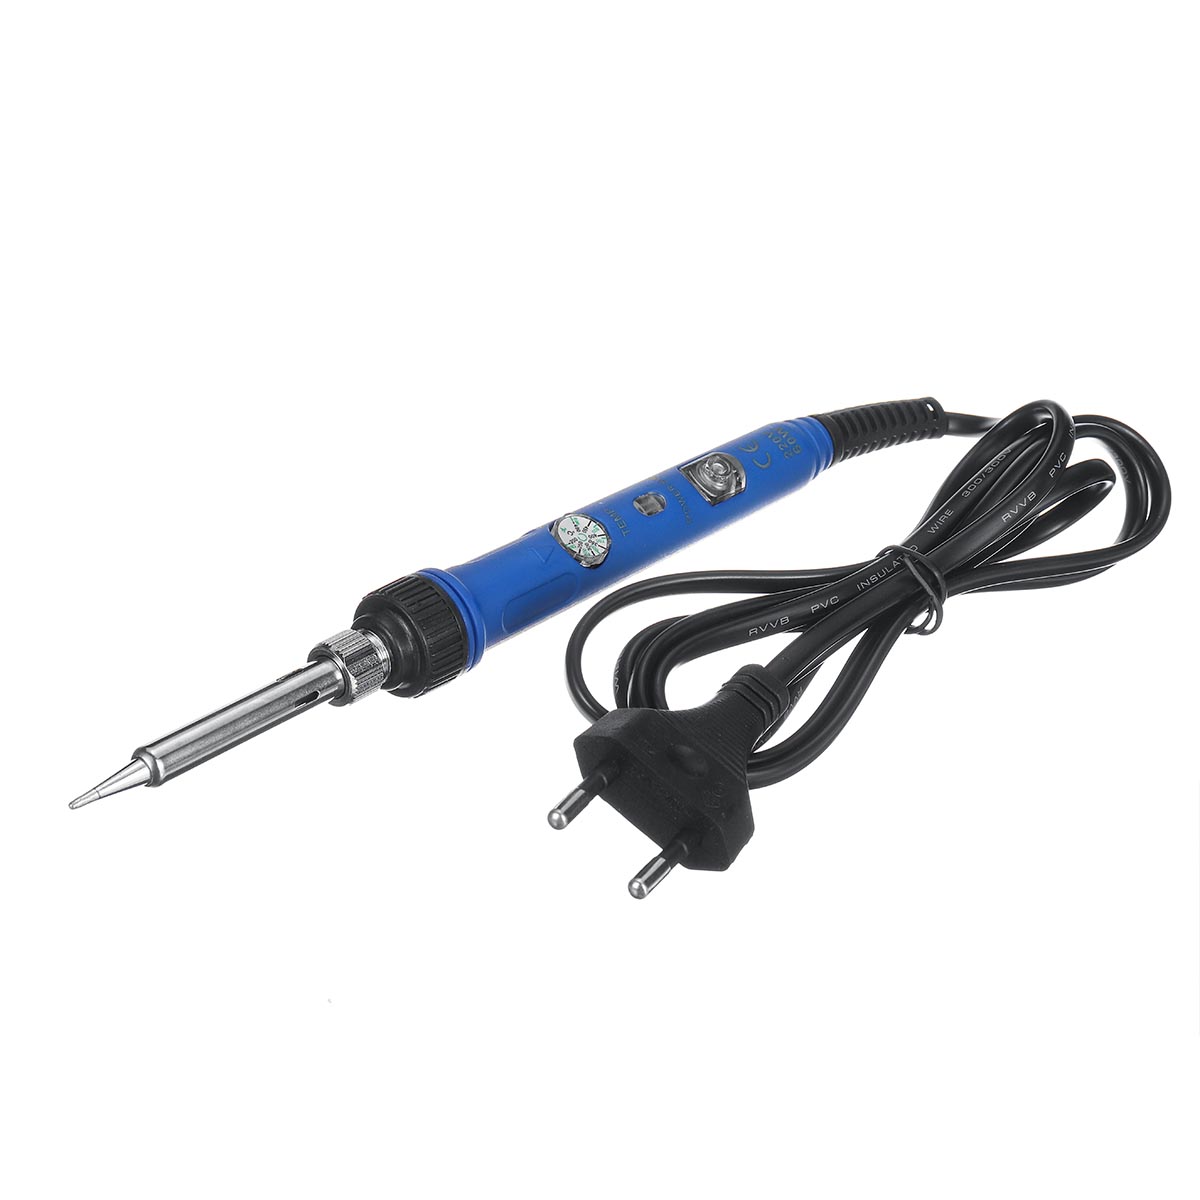 17PCS-Electric-Soldering-Iron-Tool-Kit-60W-Control-Welding-Station-Tip-Case-1721212-4